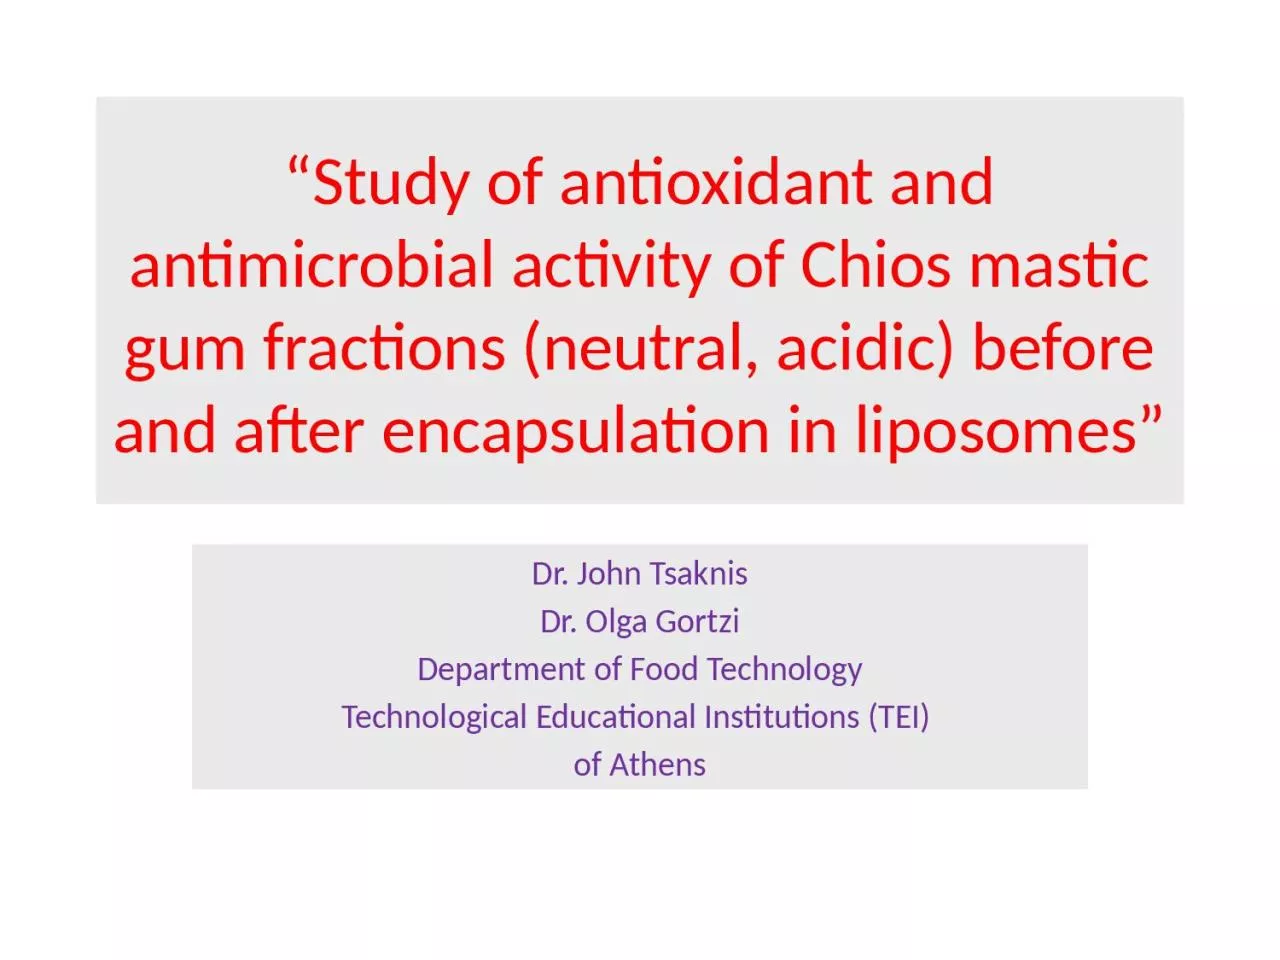 “Study of antioxidant and antimicrobial activity of Chios mastic gum fractions (neutral,